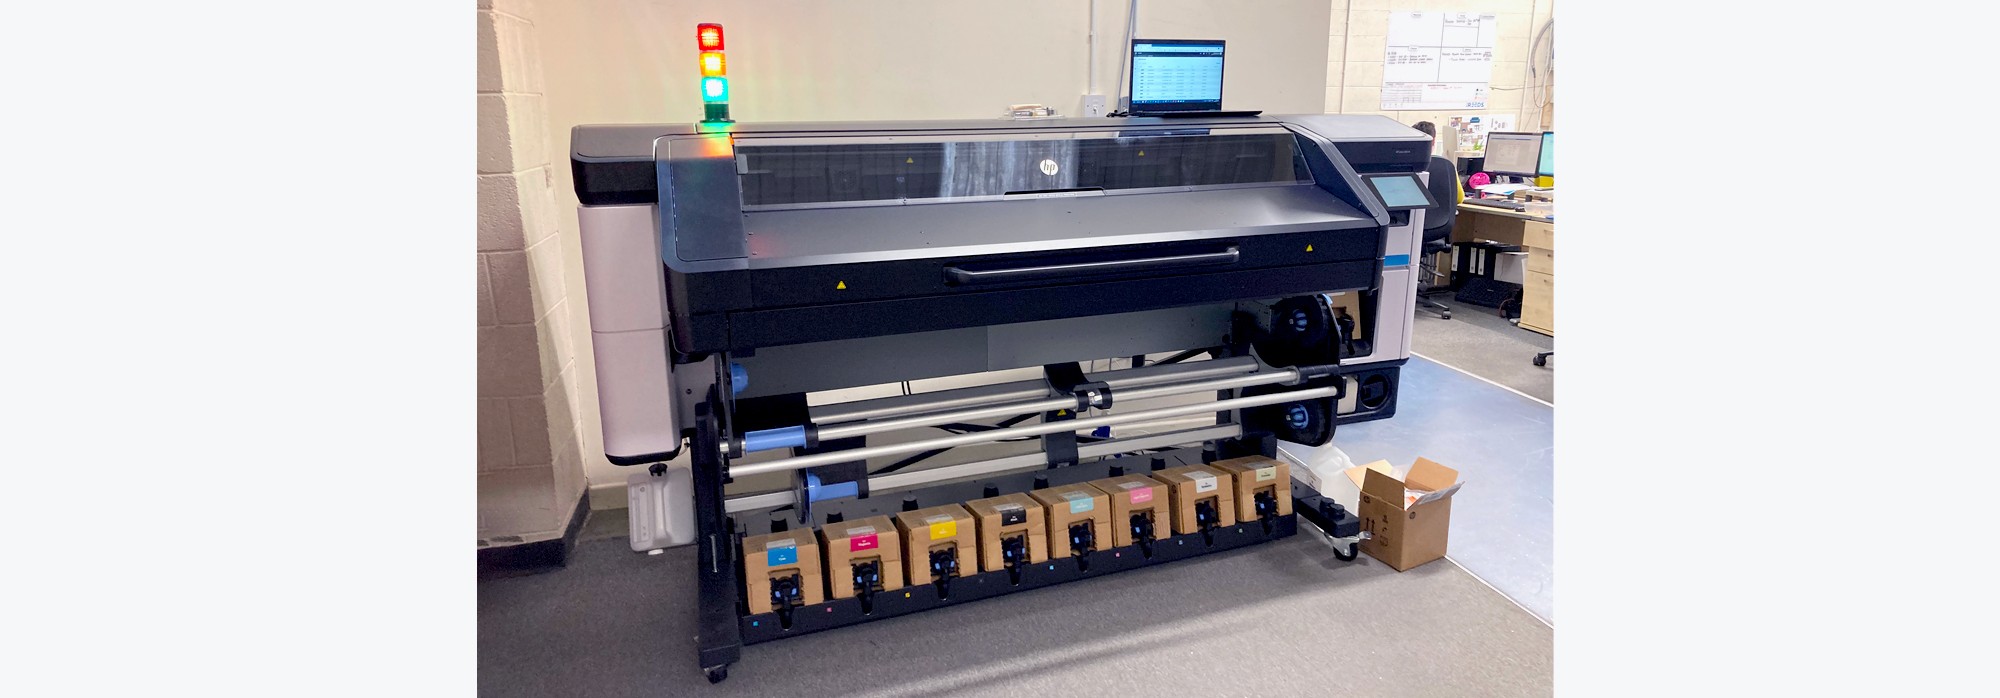 Investing in Sustainable Print: Our Brand New HP Latex 800 Wide Format Printer